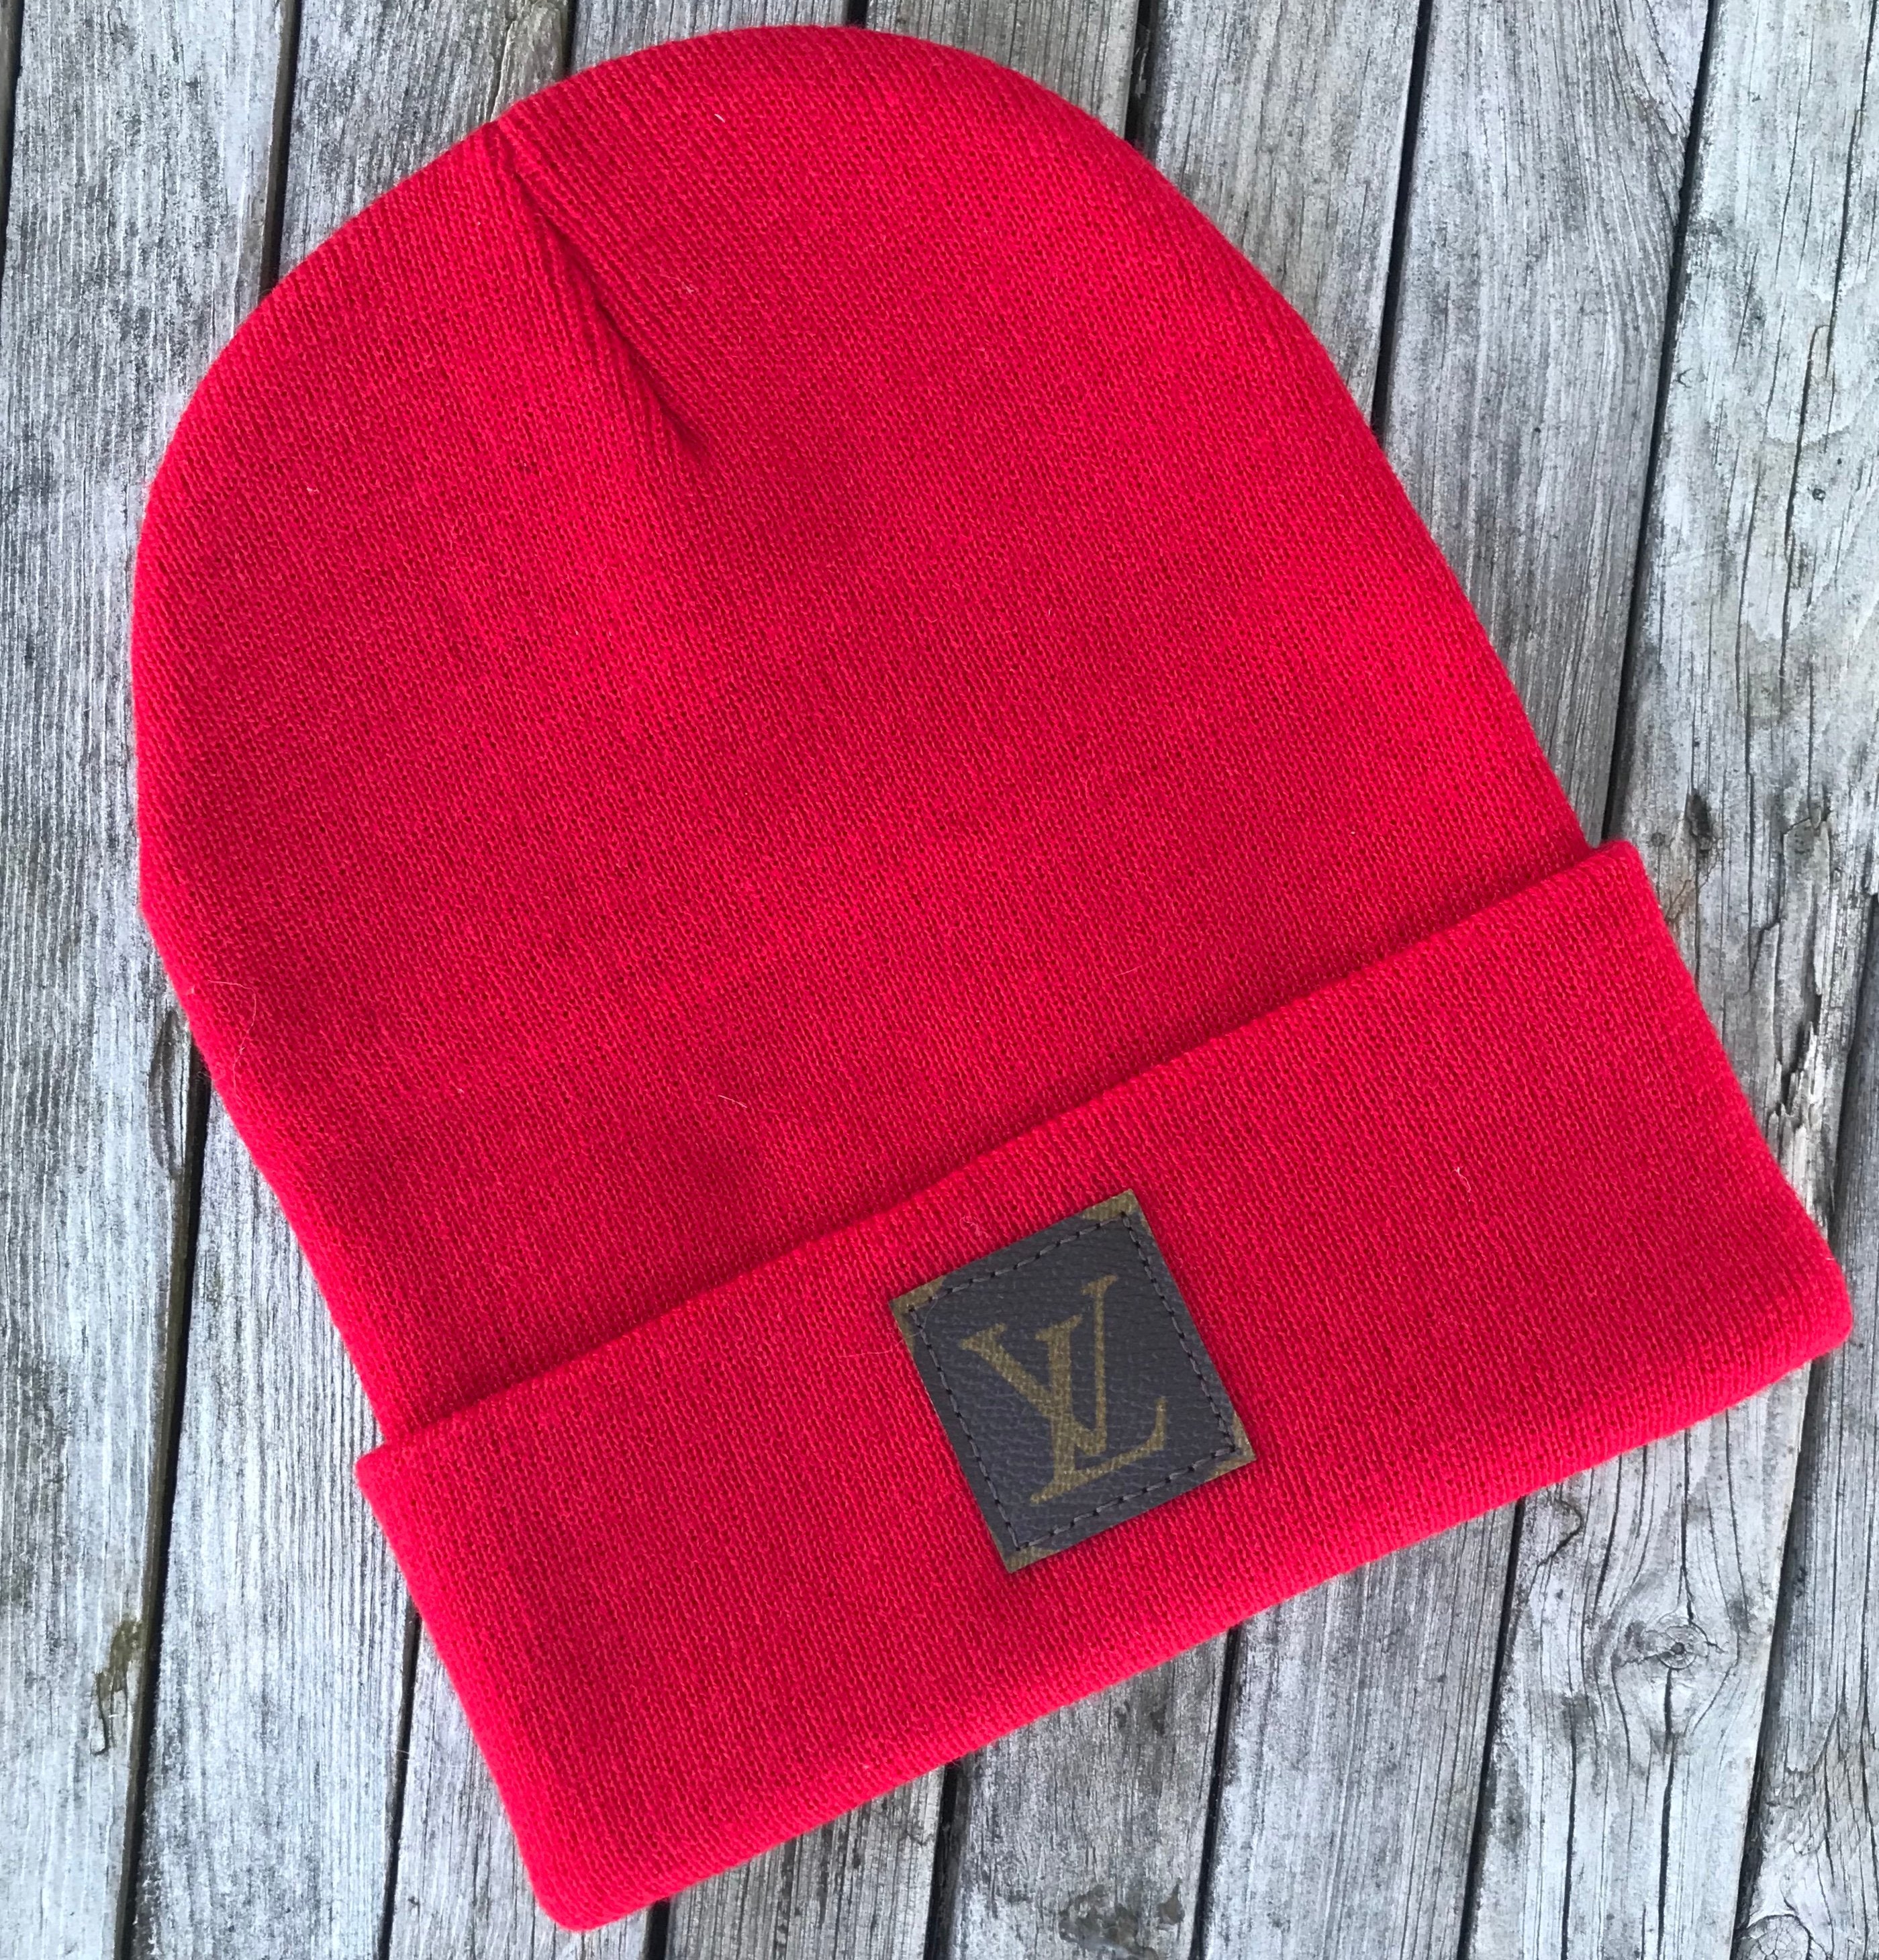 LV Beanie in Red, Blue, & Black! Available in store❗️ $55